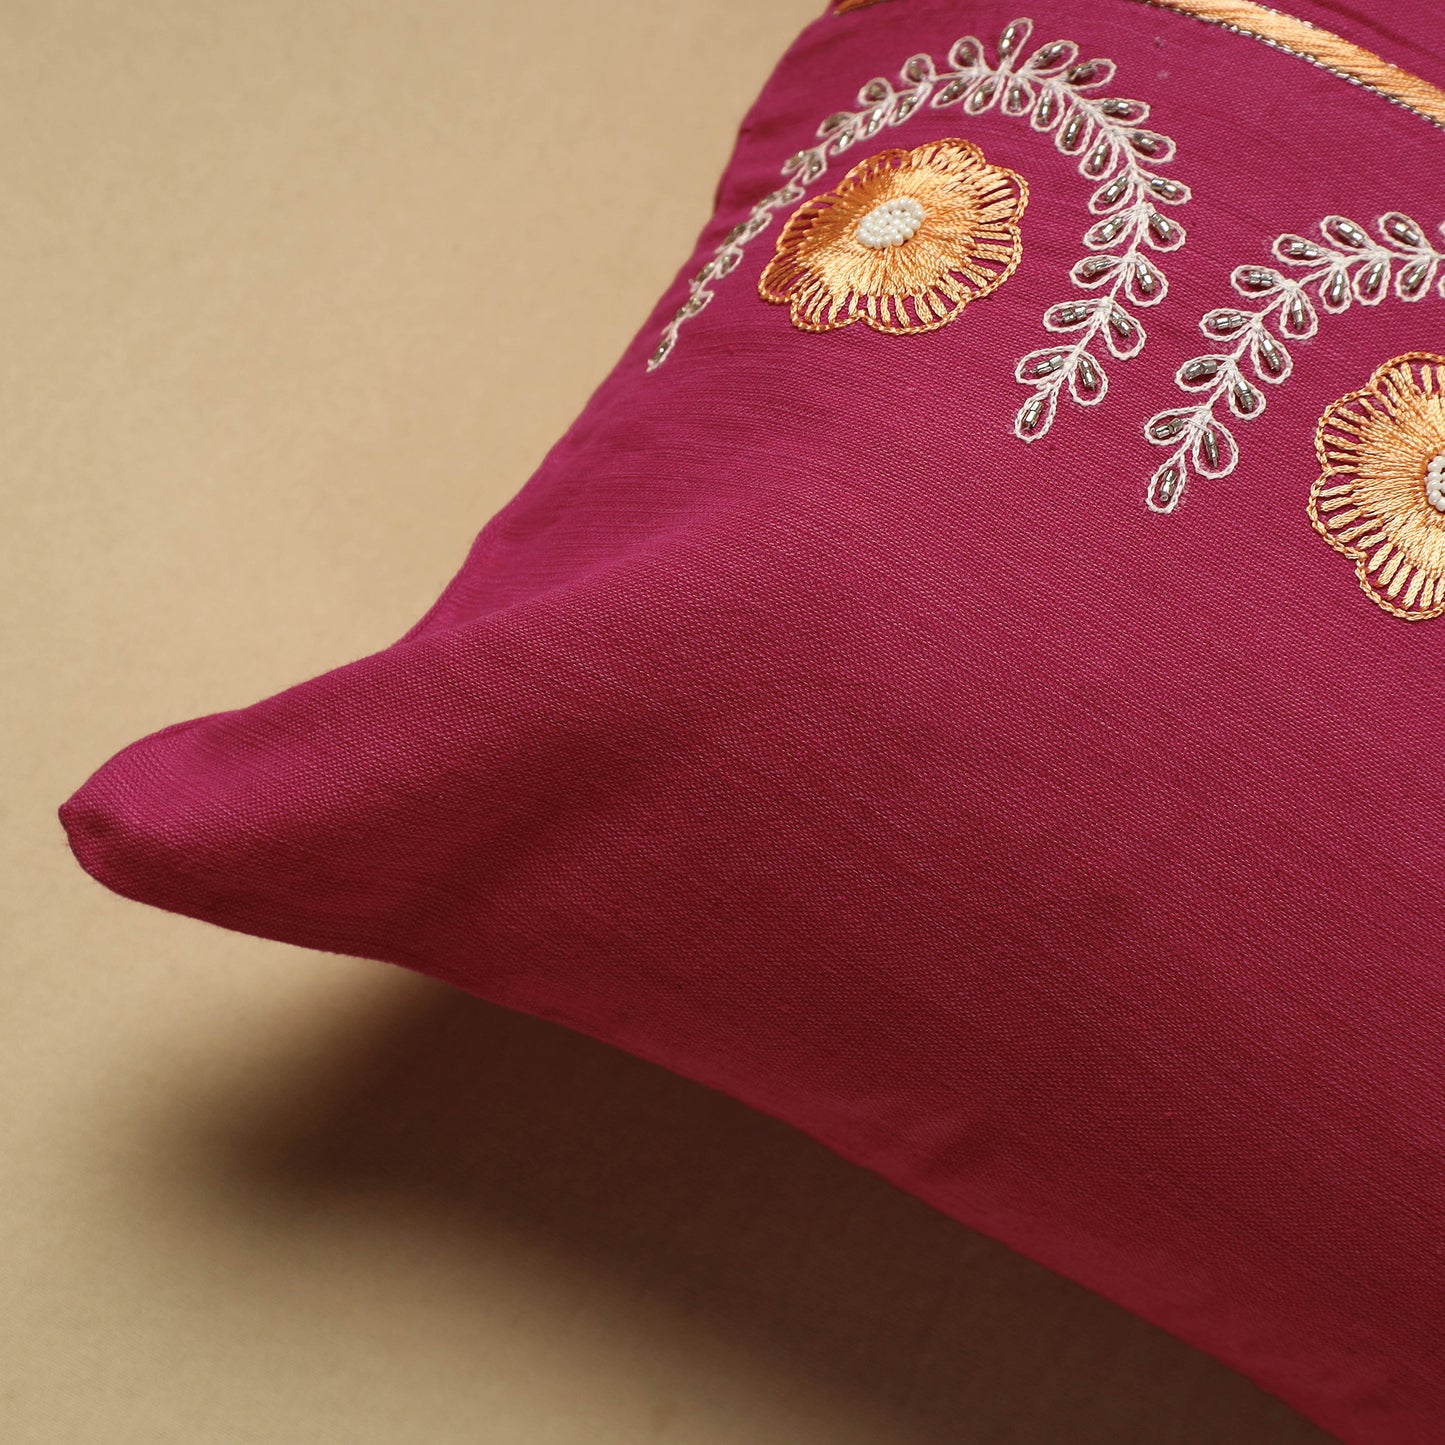 Embroidery Cotton Cushion Cover 